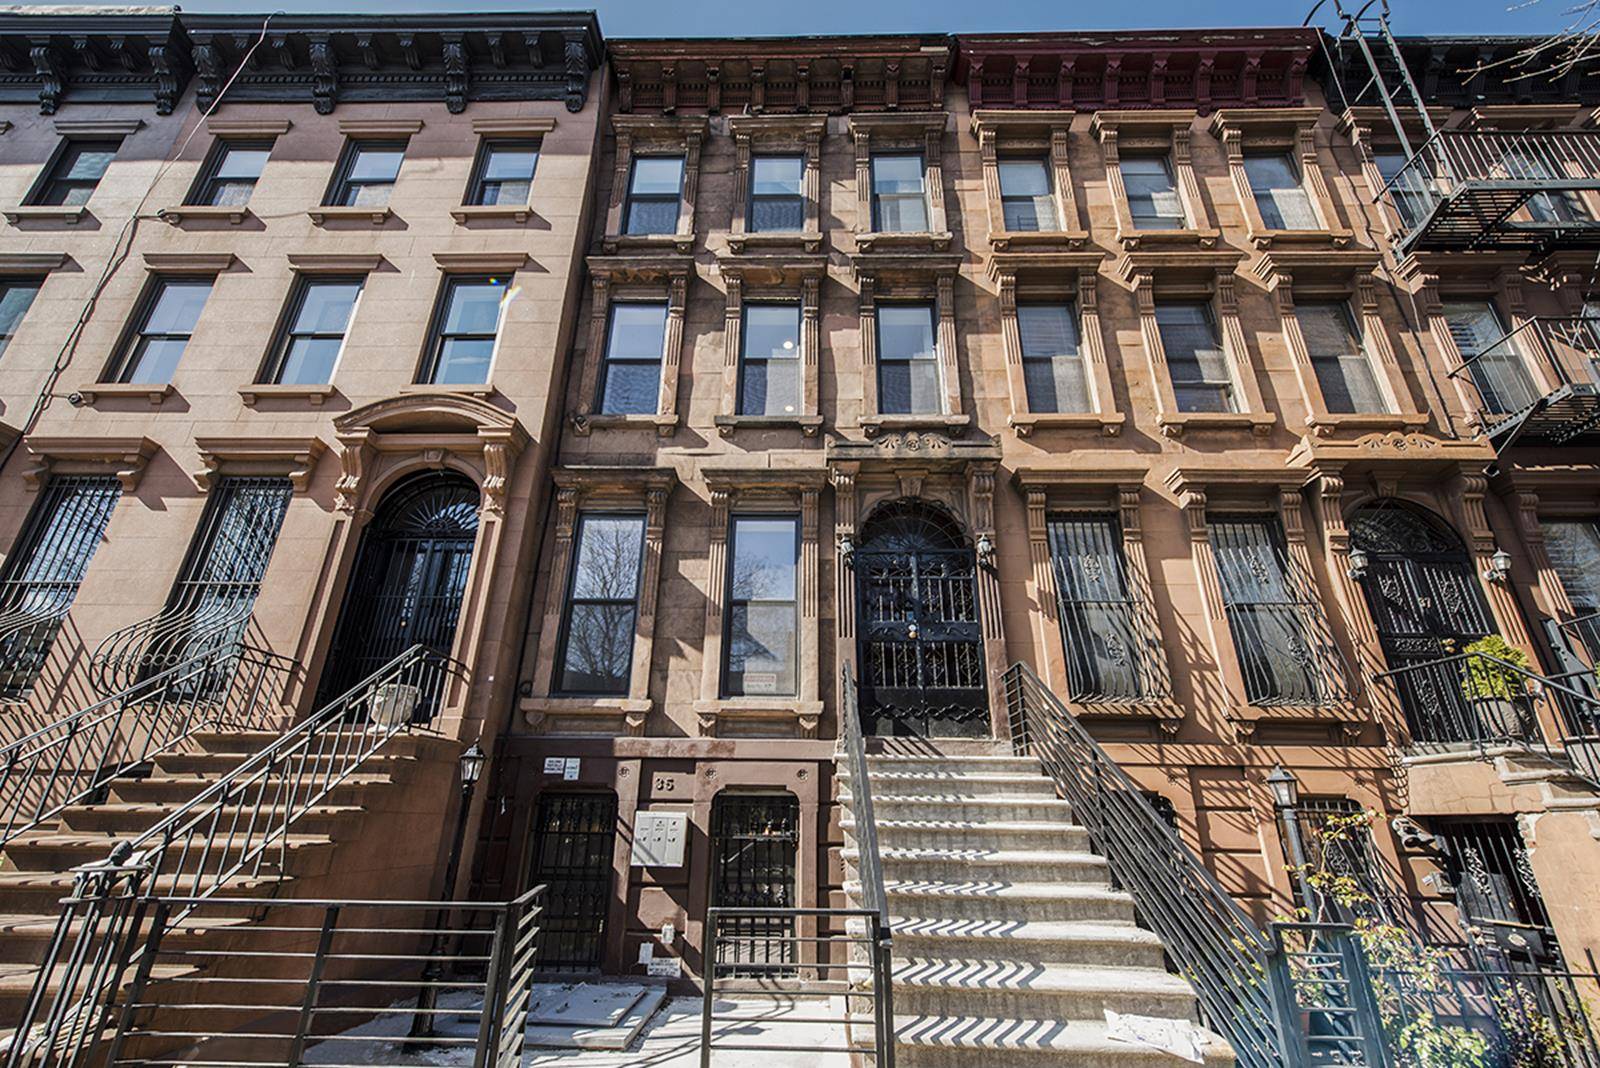 Beautifully restored, this classic Brooklyn brownstone is a quintessentially modern home.